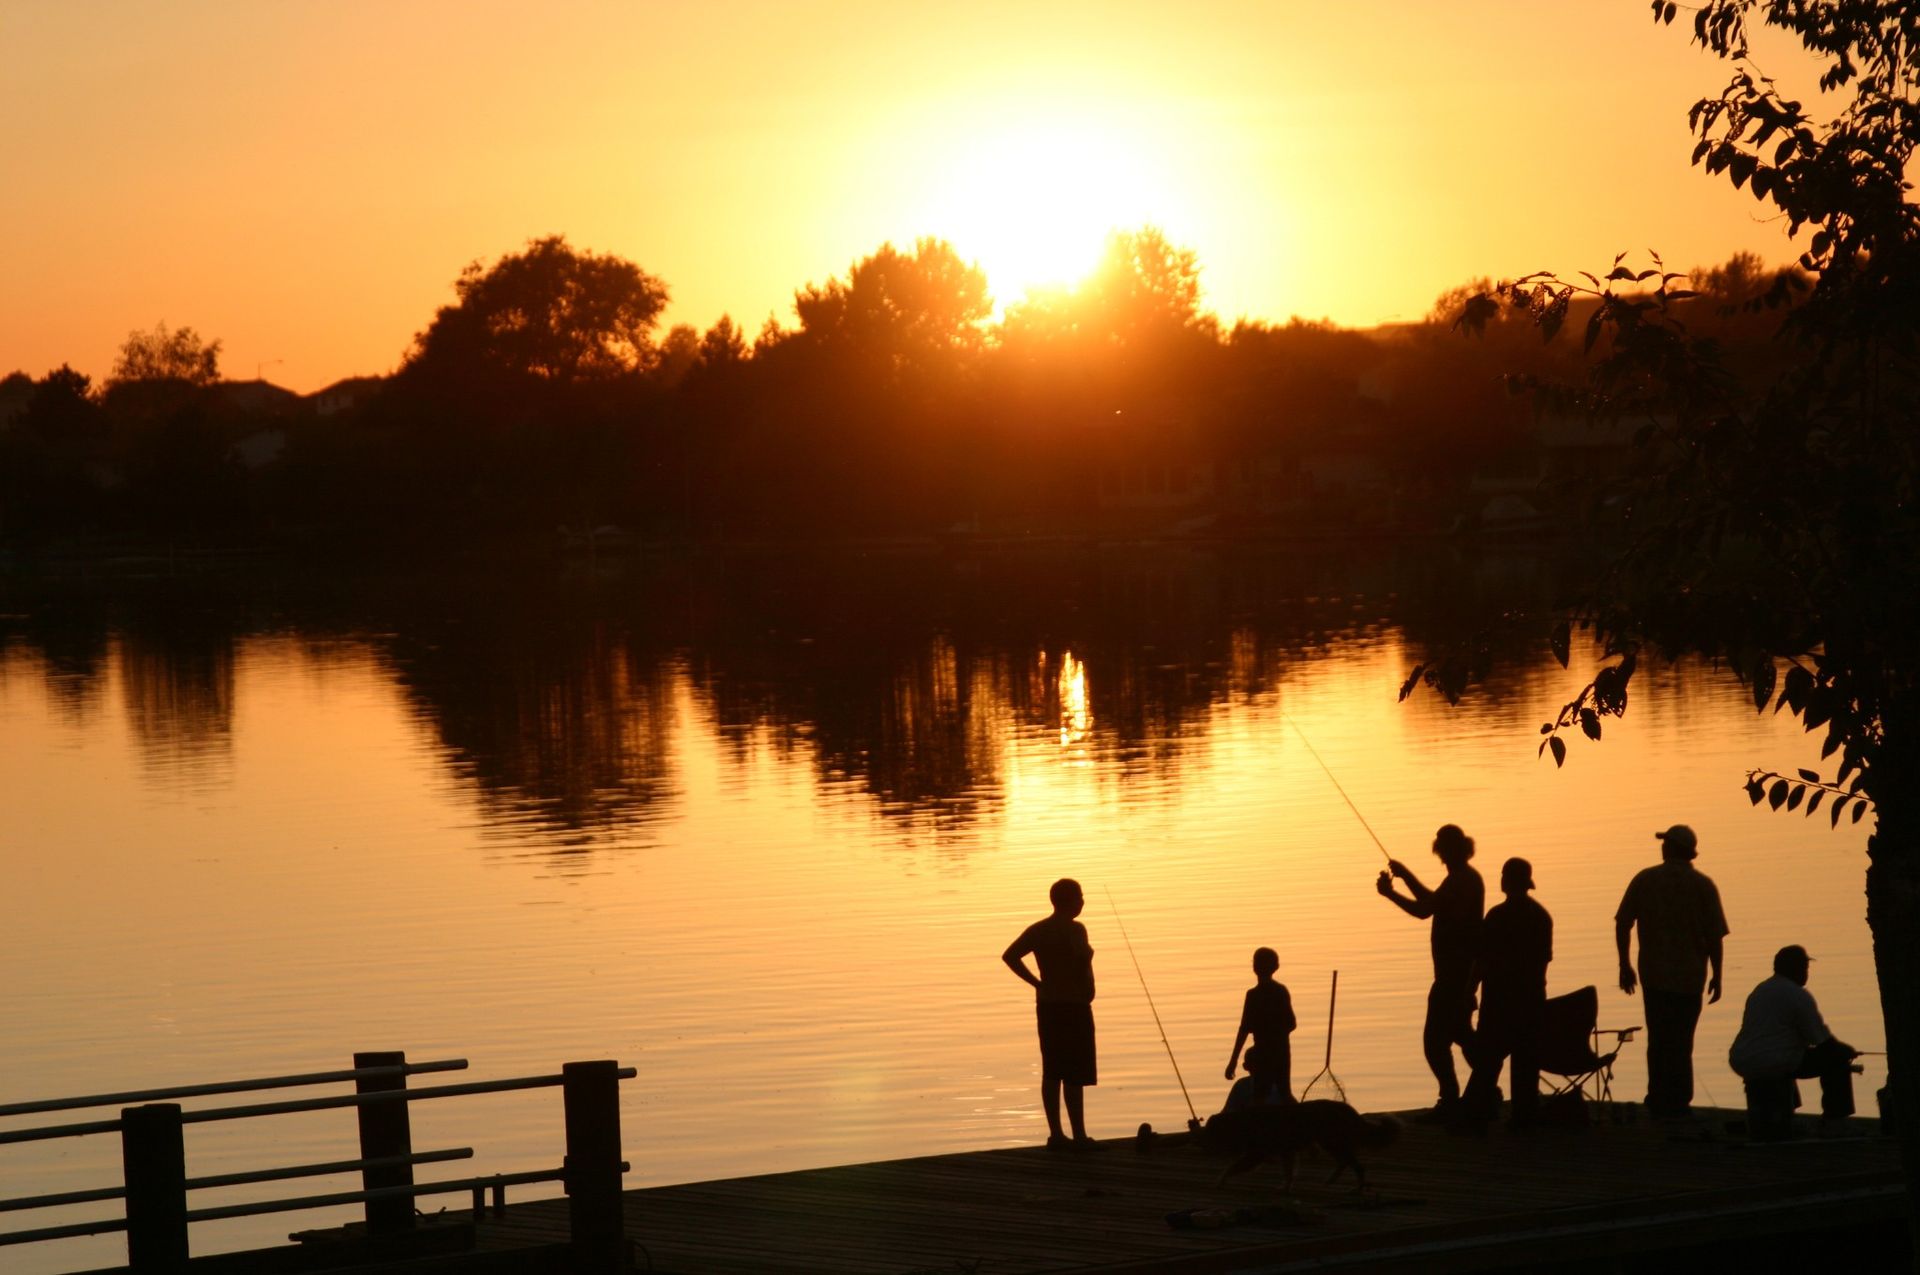 A family fishing together at sunset.